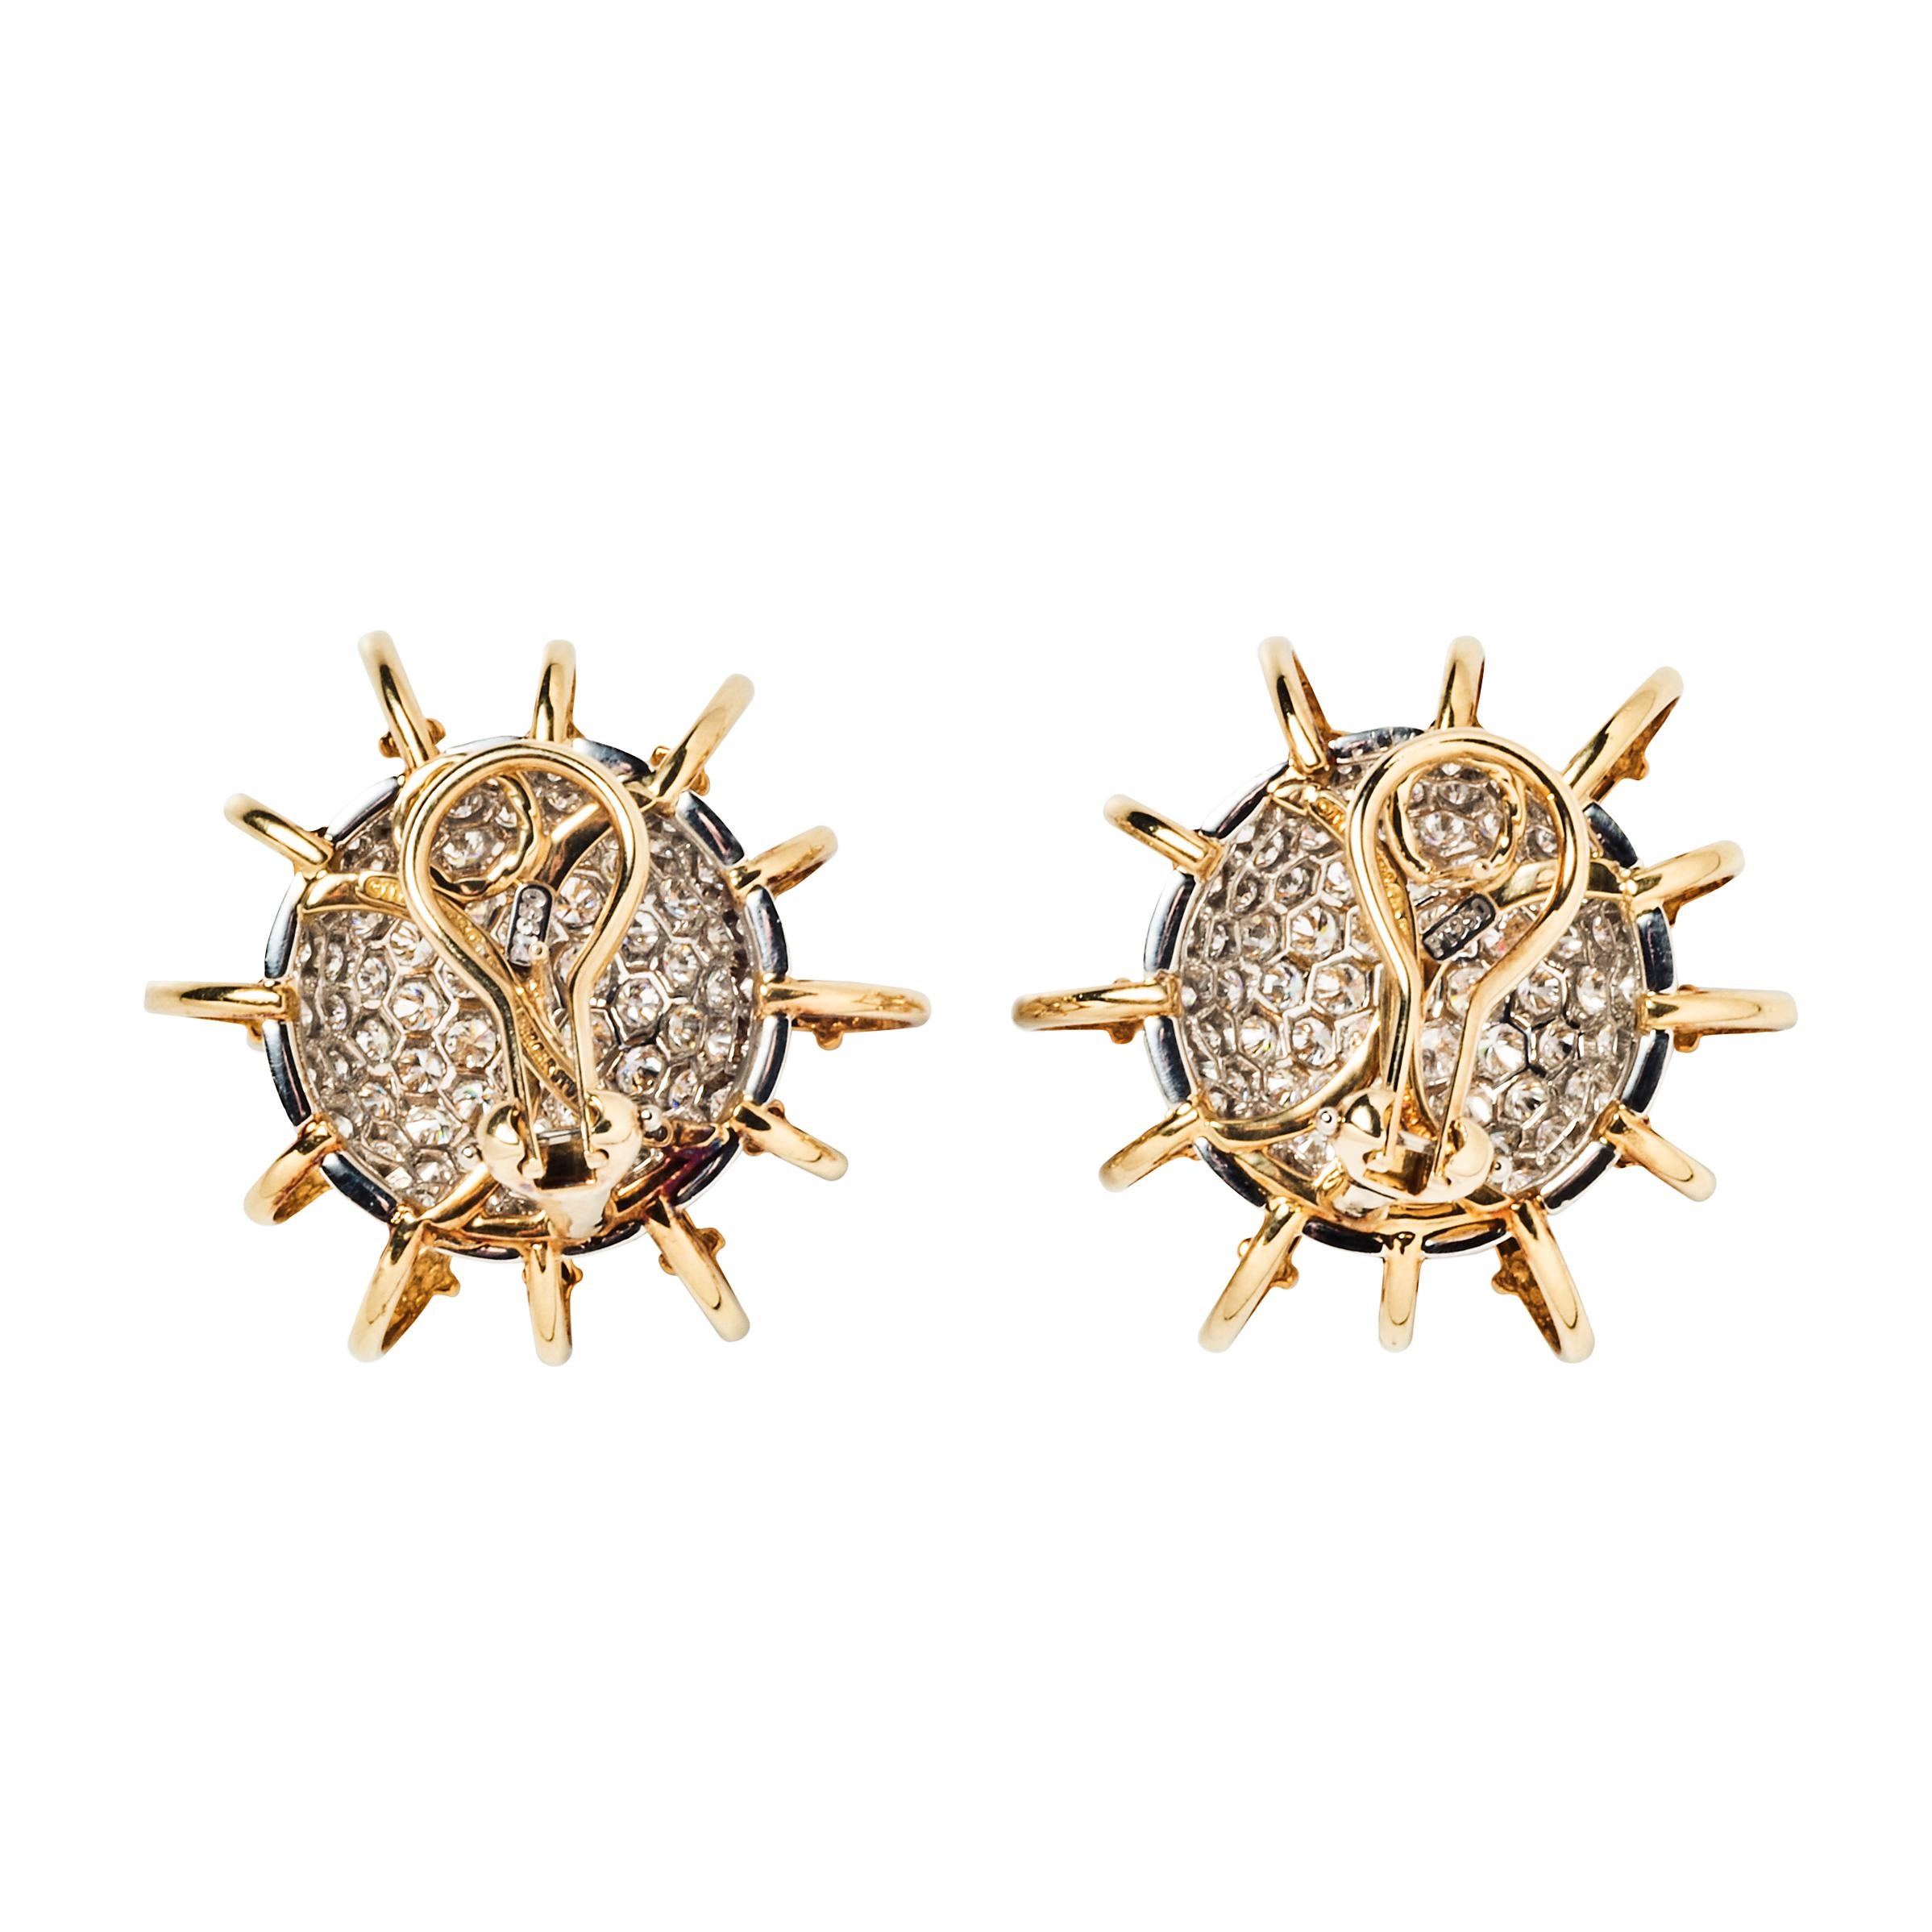 Jean Schlumberger’s Apollo earrings take their visual inspiration from electrons circling an atom. Of bombé-style, they are set with pavé diamonds and surrounded by 18k yellow gold looped wire.

- 1.29” in diameter
- Approximately 5.69 carats of